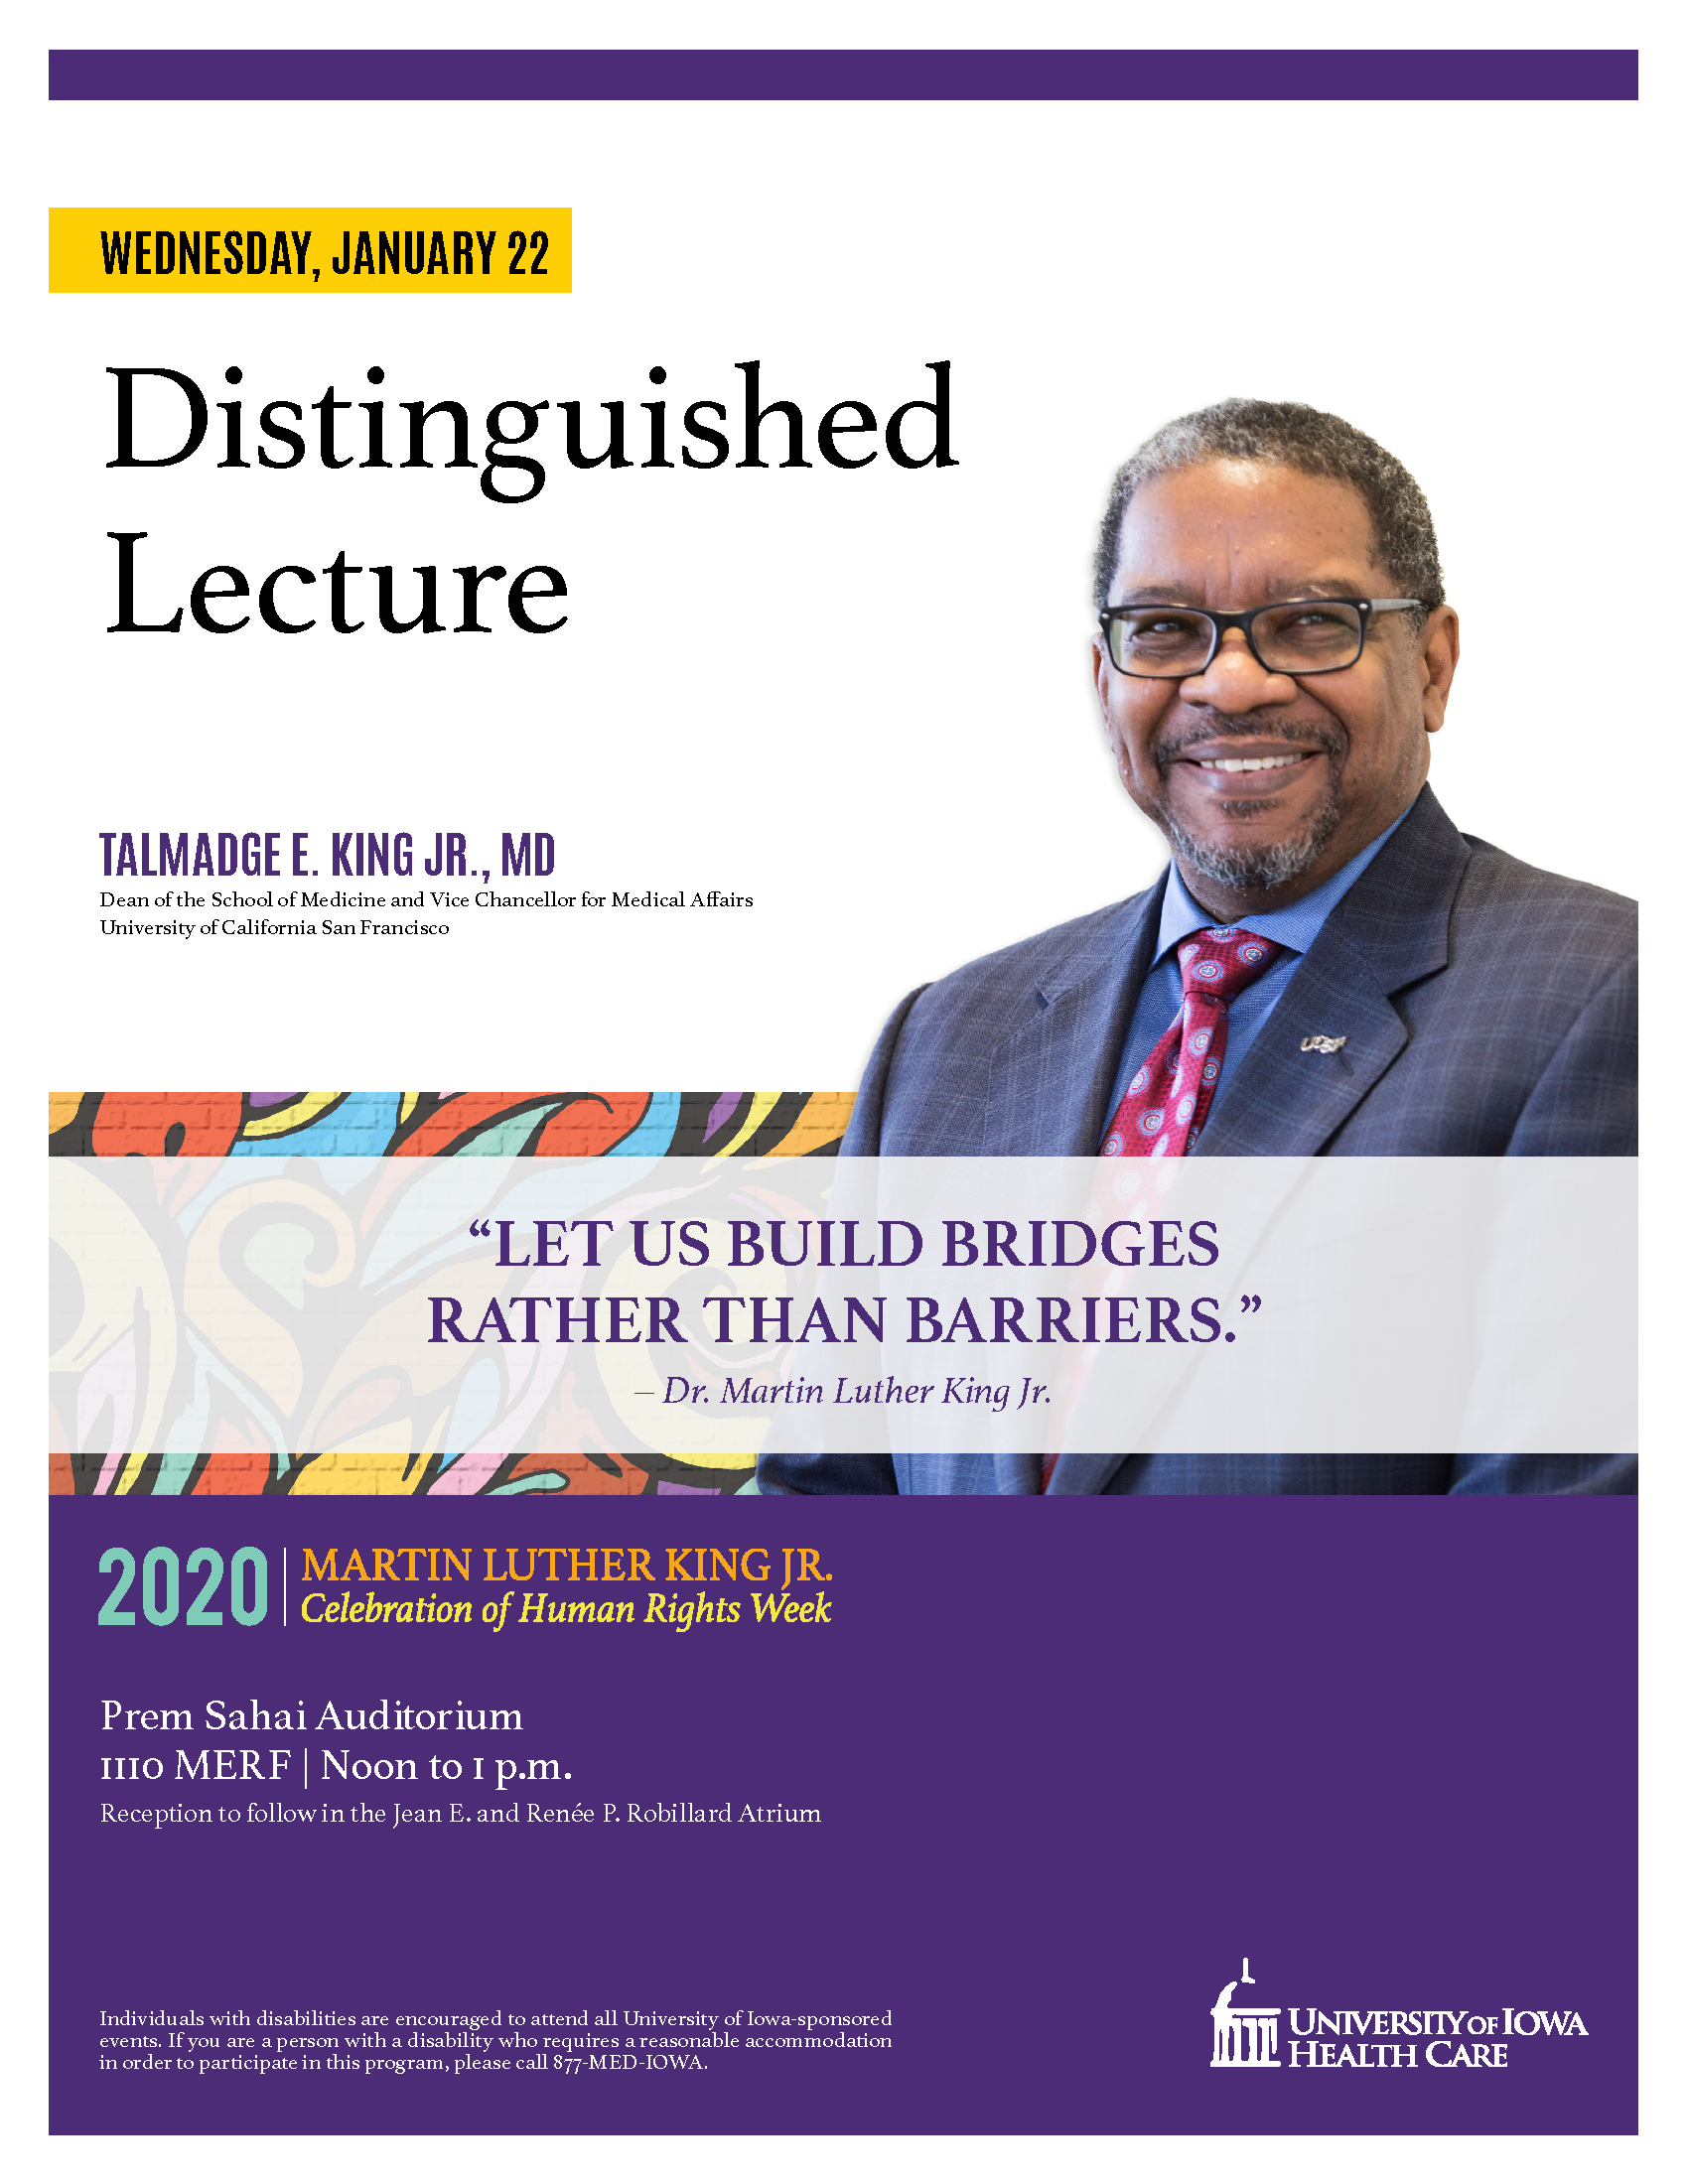 University of Iowa Health Care Martin Luther King, Jr. Distinguished Lecture: Talmadge E. King, Jr. MD promotional image